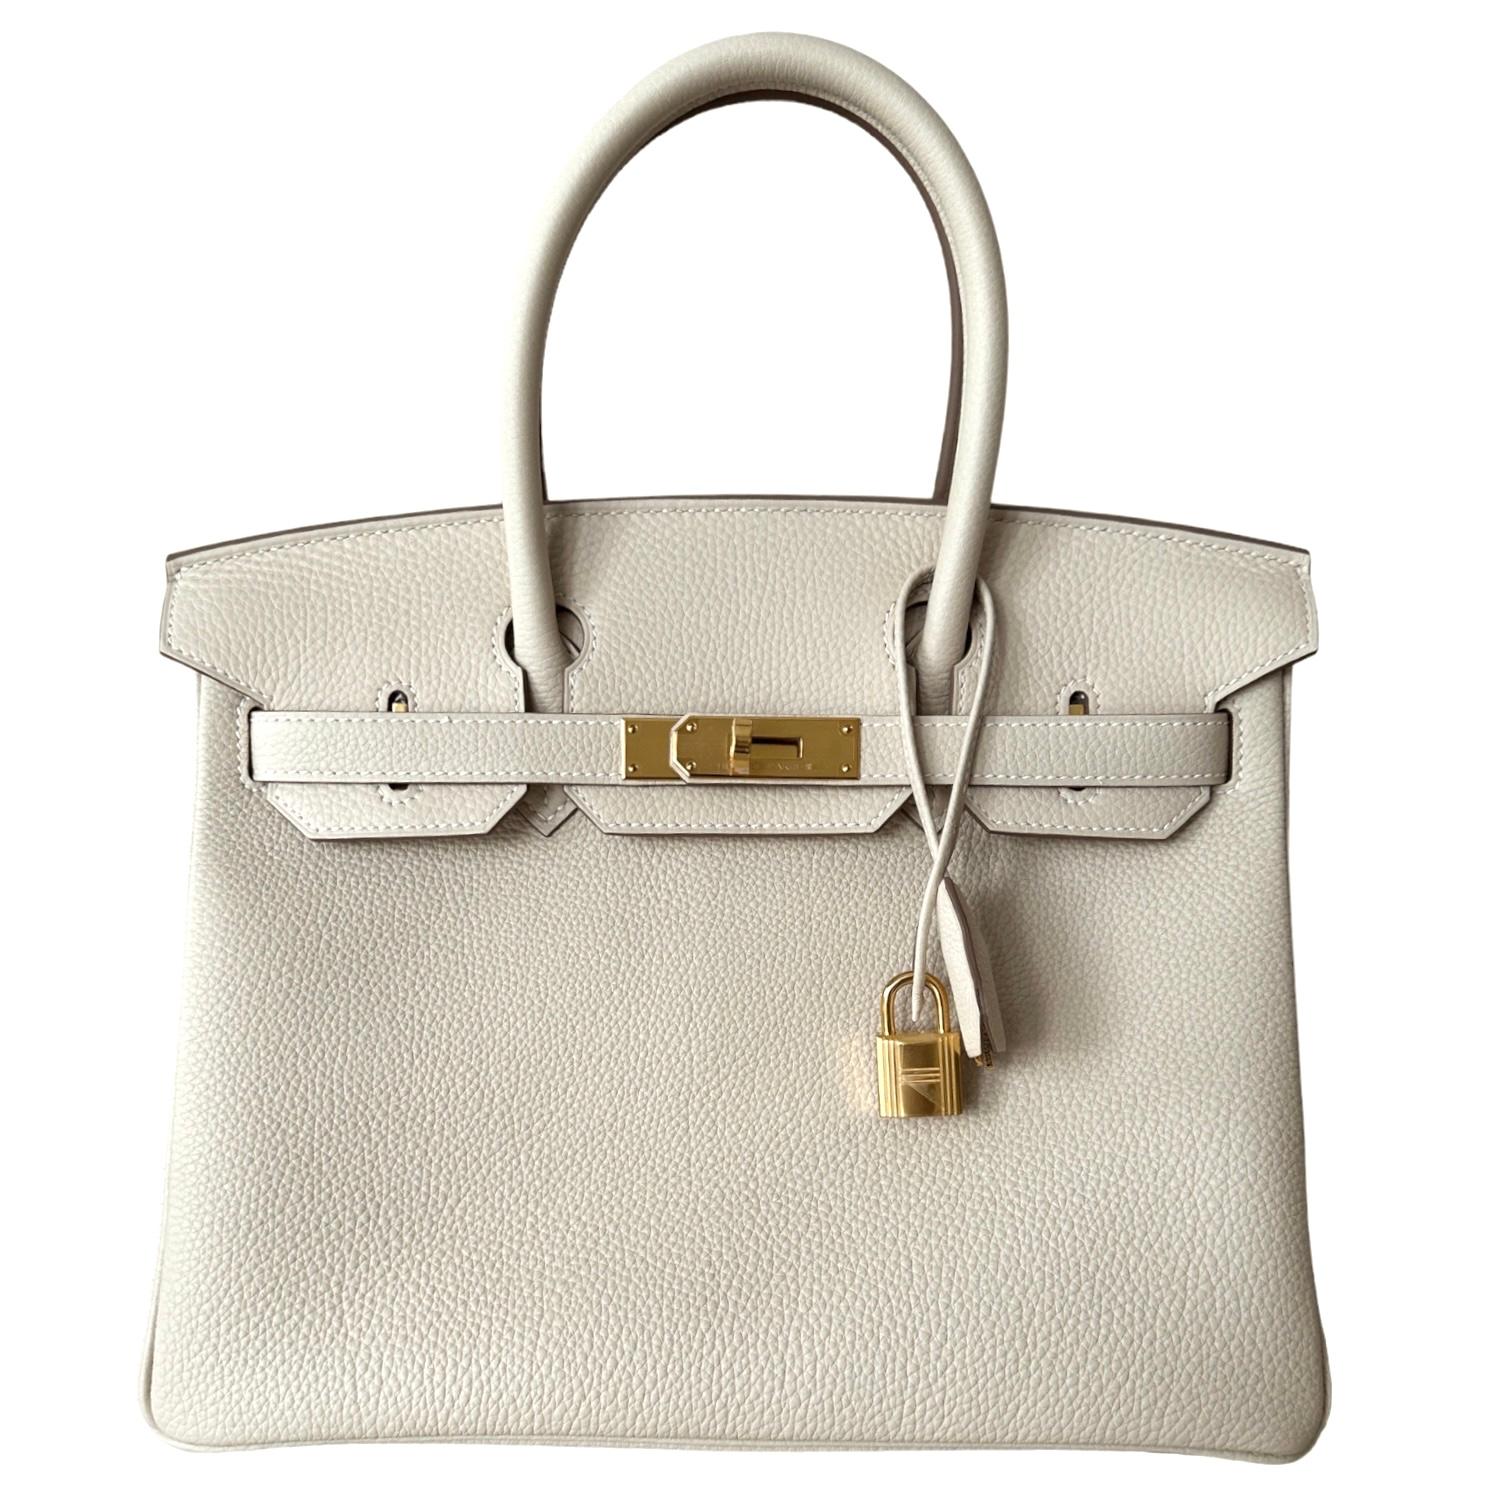 Hermes Birkin 30cm Hermes Birkin 

Color: Craie , a creamy off white

Size: 30cm

Tonal Stitching

Gold Hardware

Collection: B 2023
Fresh out never carried

Origin: France
Hermes Birkin 30 is a popular size of the iconic Birkin handbag from the